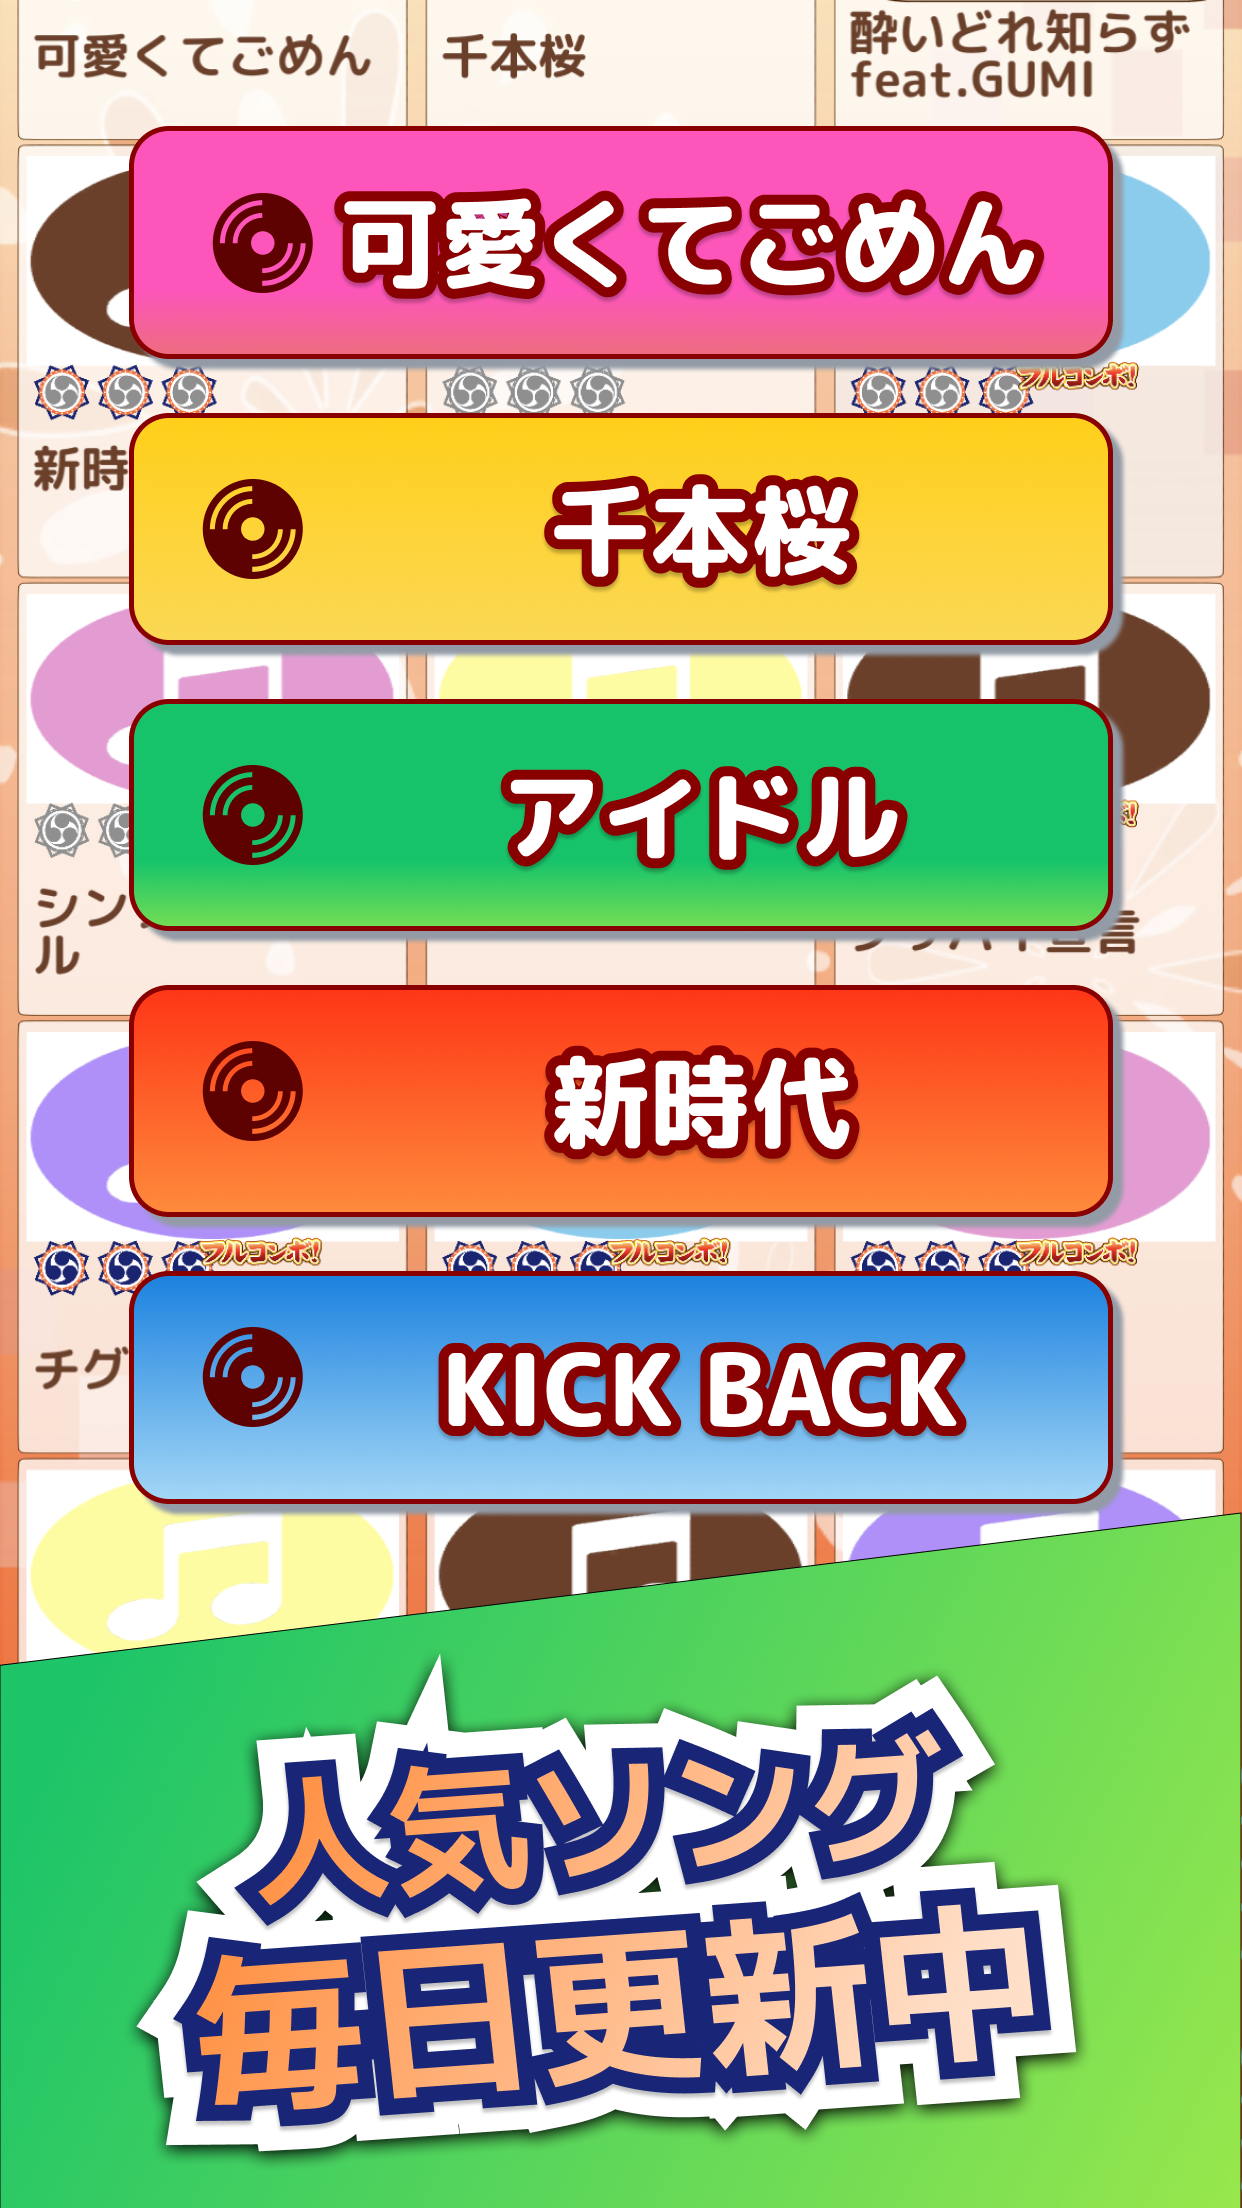 Screenshot 1 of Hit song by Taiko - Taiko Tap! Stress relief sound game with repeated hits 1.5.2